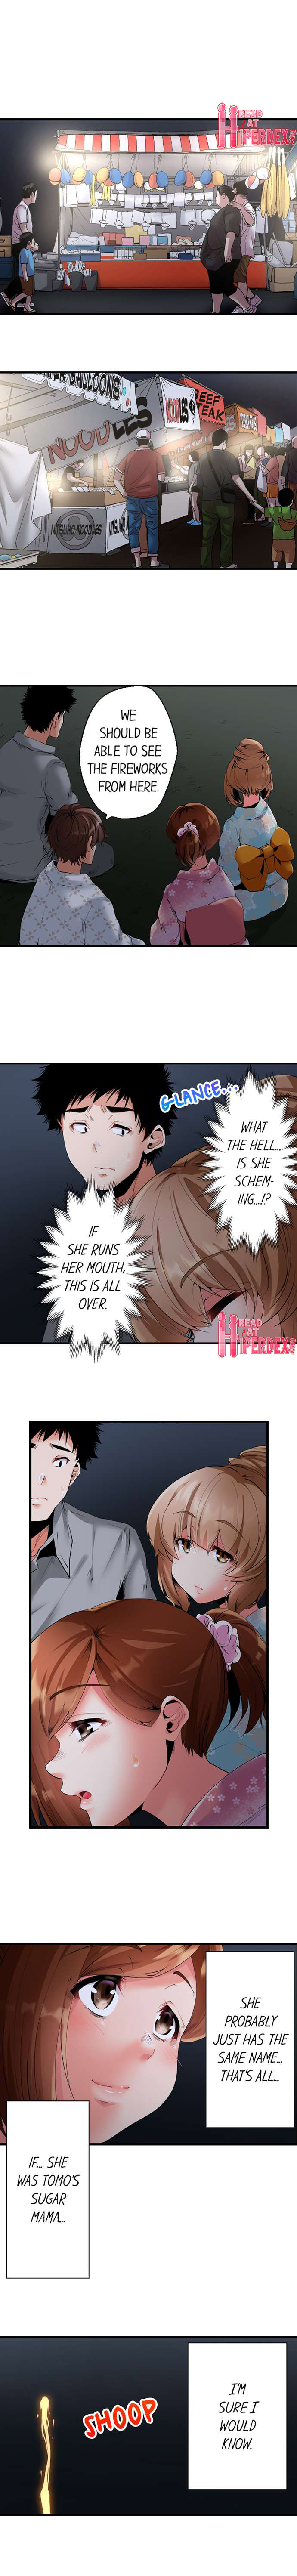 A Rebellious Girl's Sexual Instruction by Her Teacher - Chapter 28 Page 8